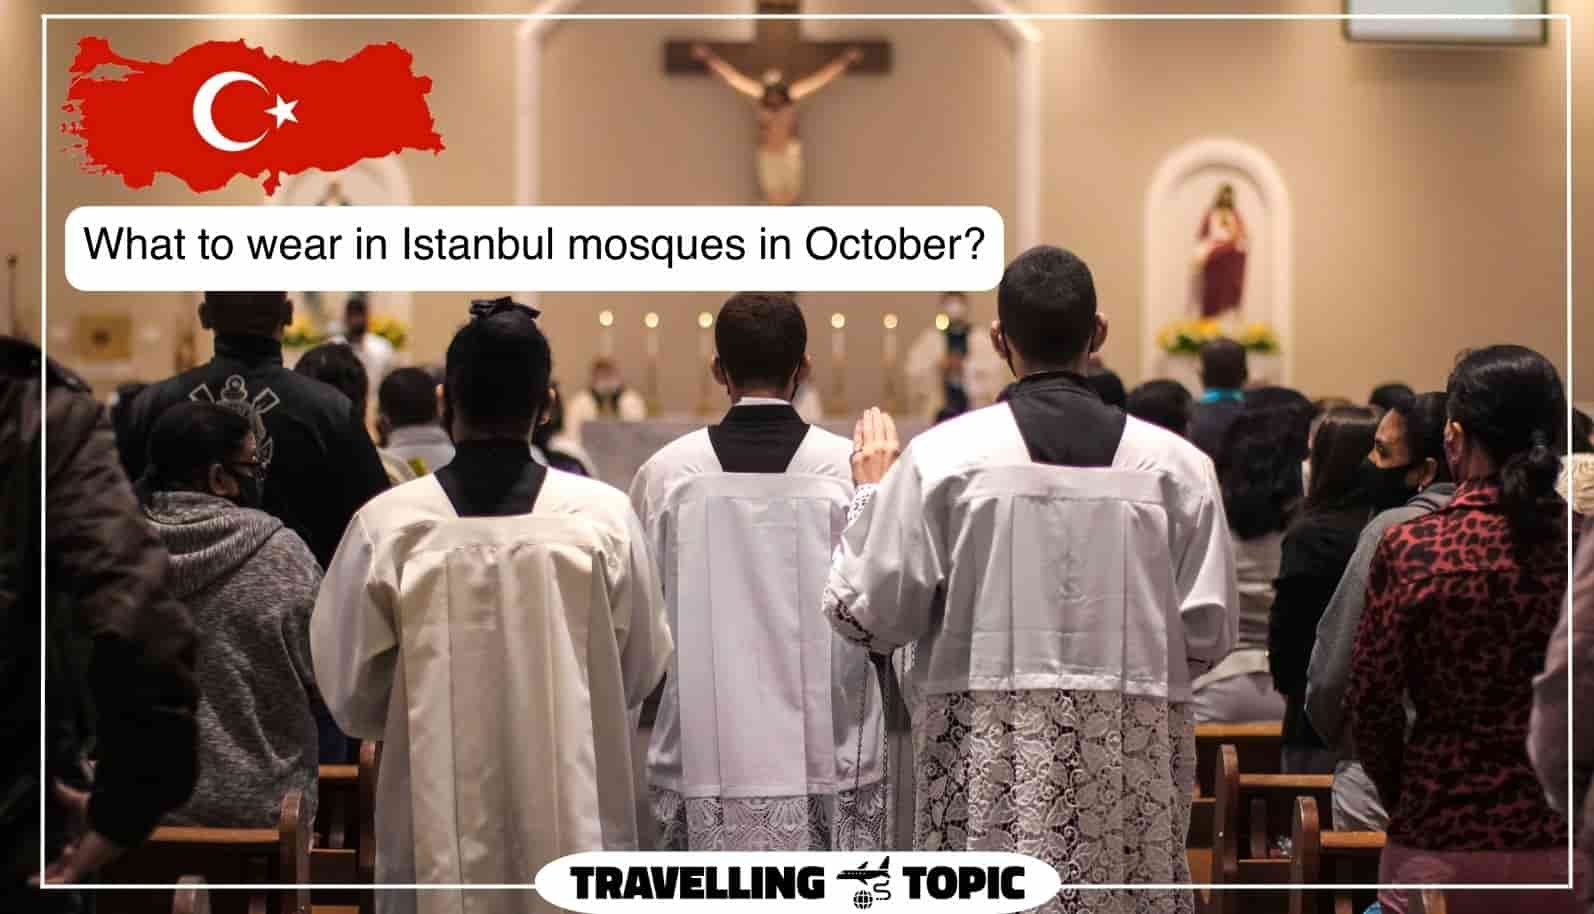 What to wear in Istanbul mosques in October